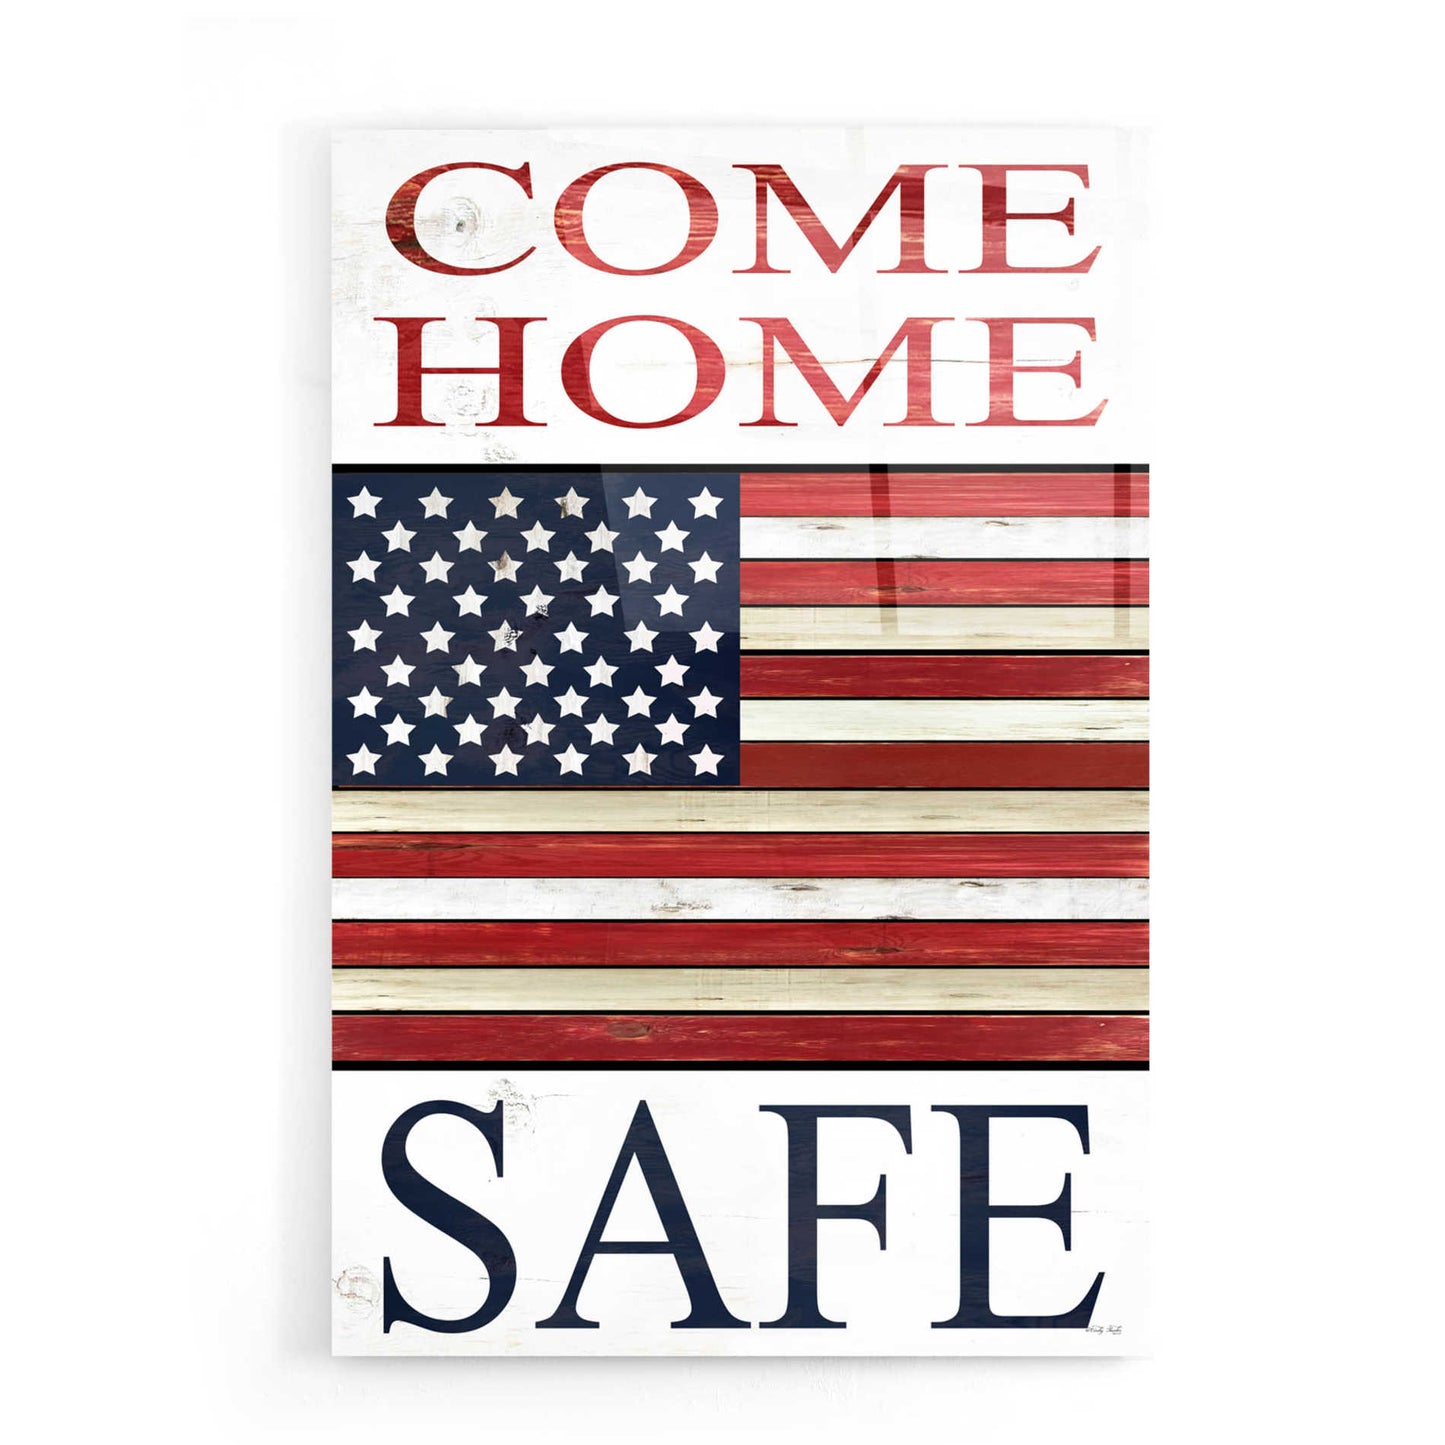 Epic Art 'Come Home Safe Patriot' by Cindy Jacobs, Acrylic Glass Wall Art,16x24